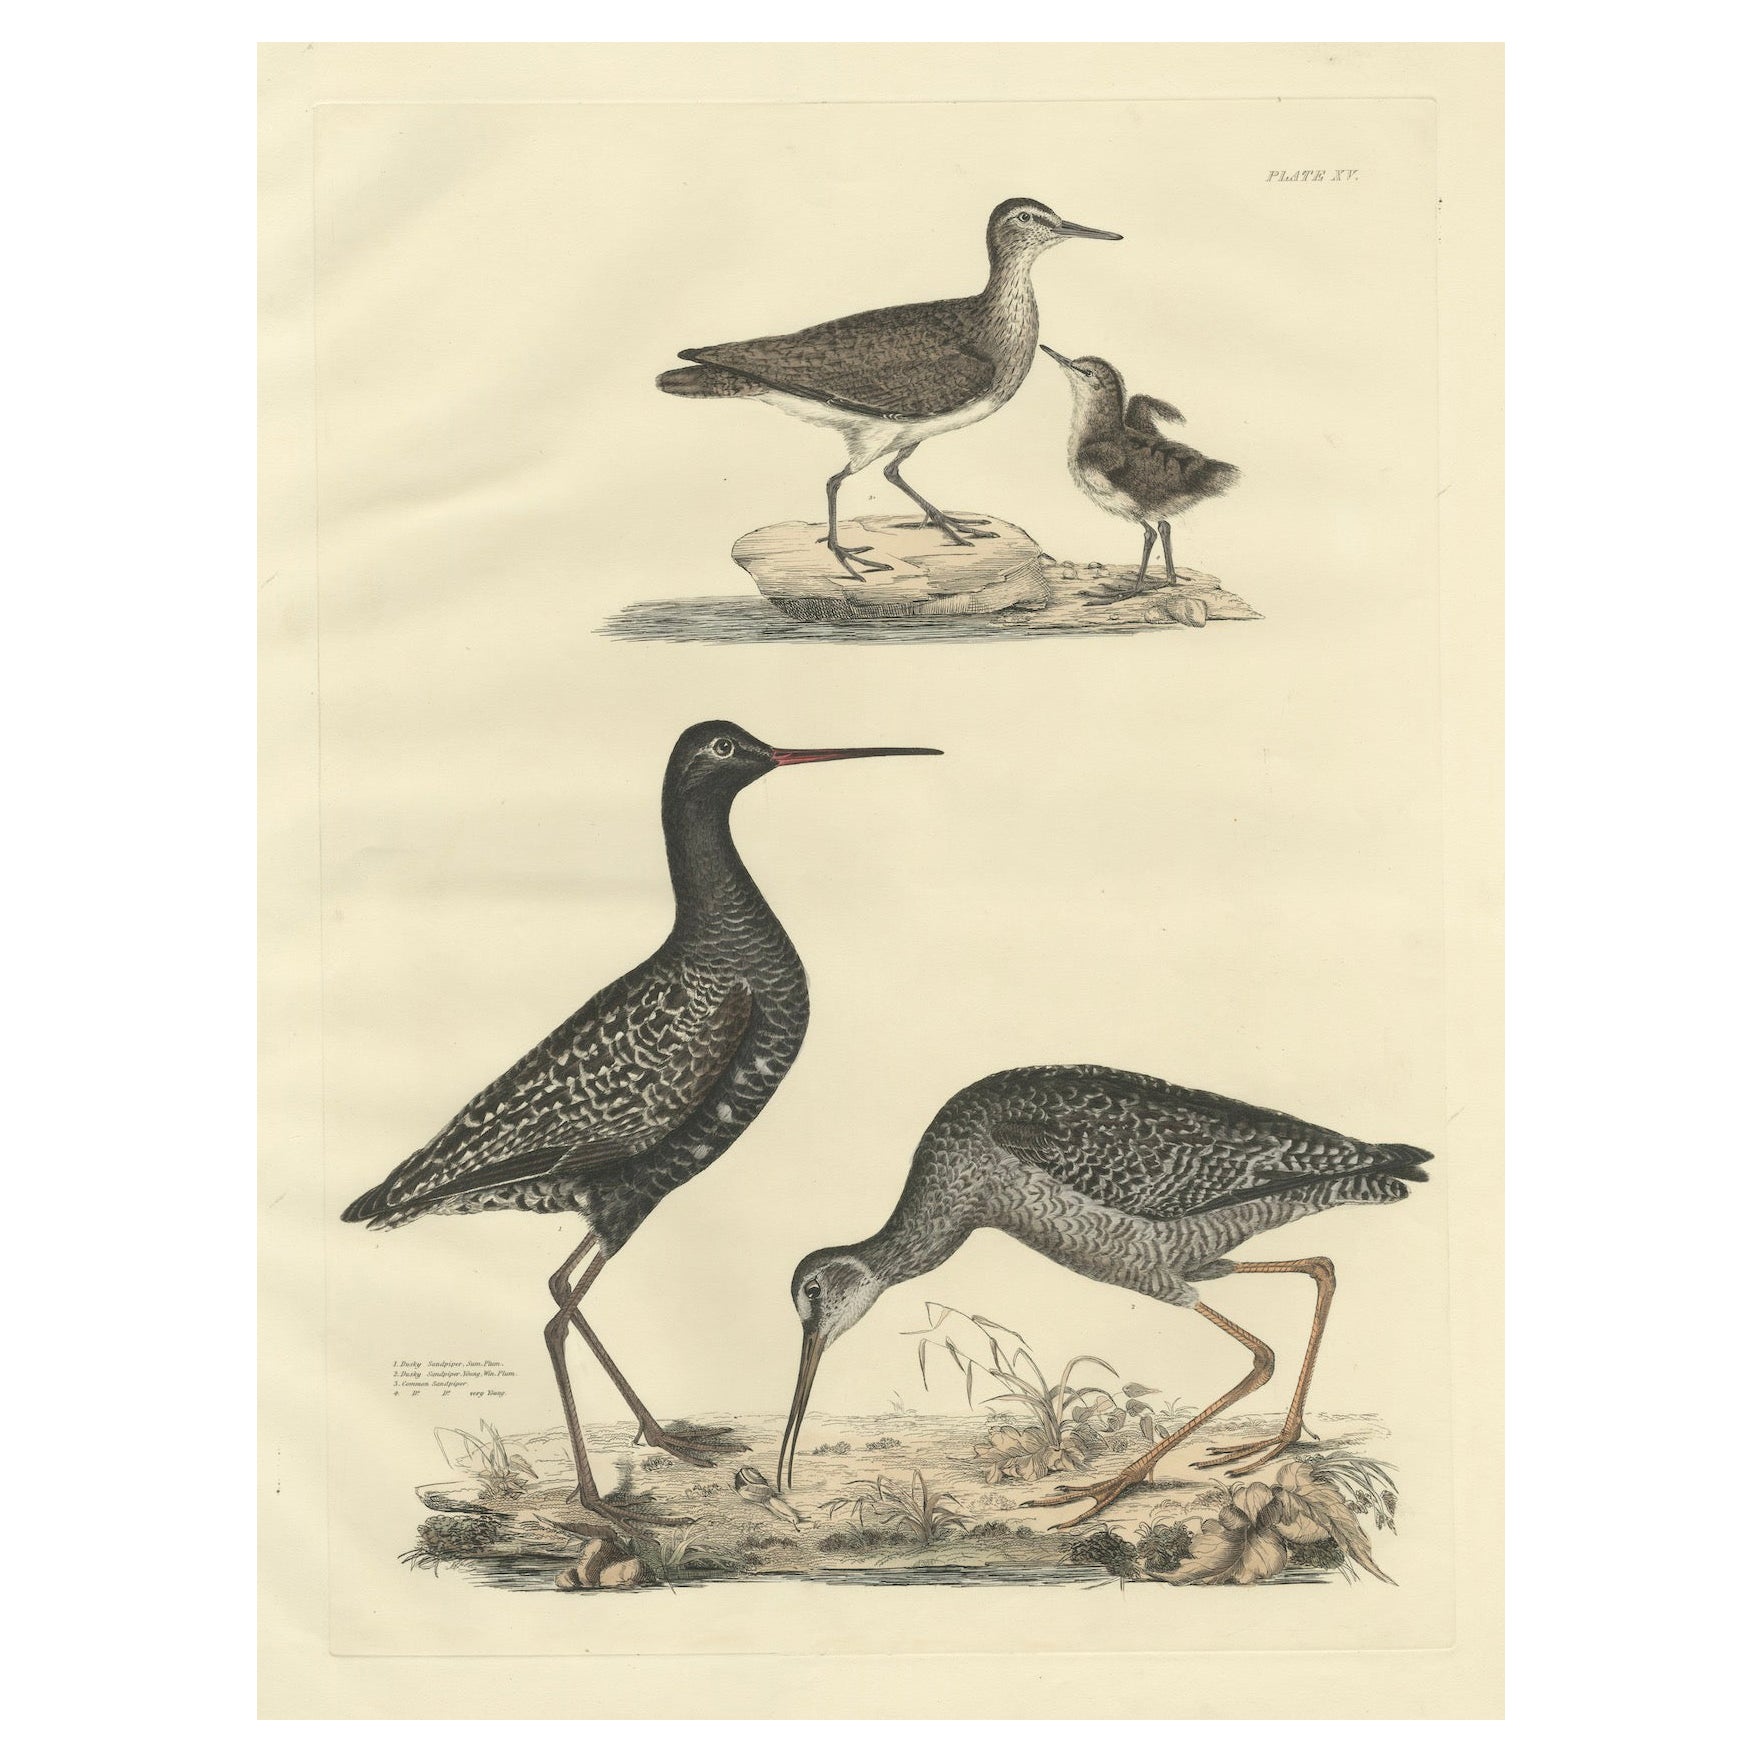 "Plate XV: The Sandpipers - A Study in Seasonal and Developmental Plumage, 1826 For Sale